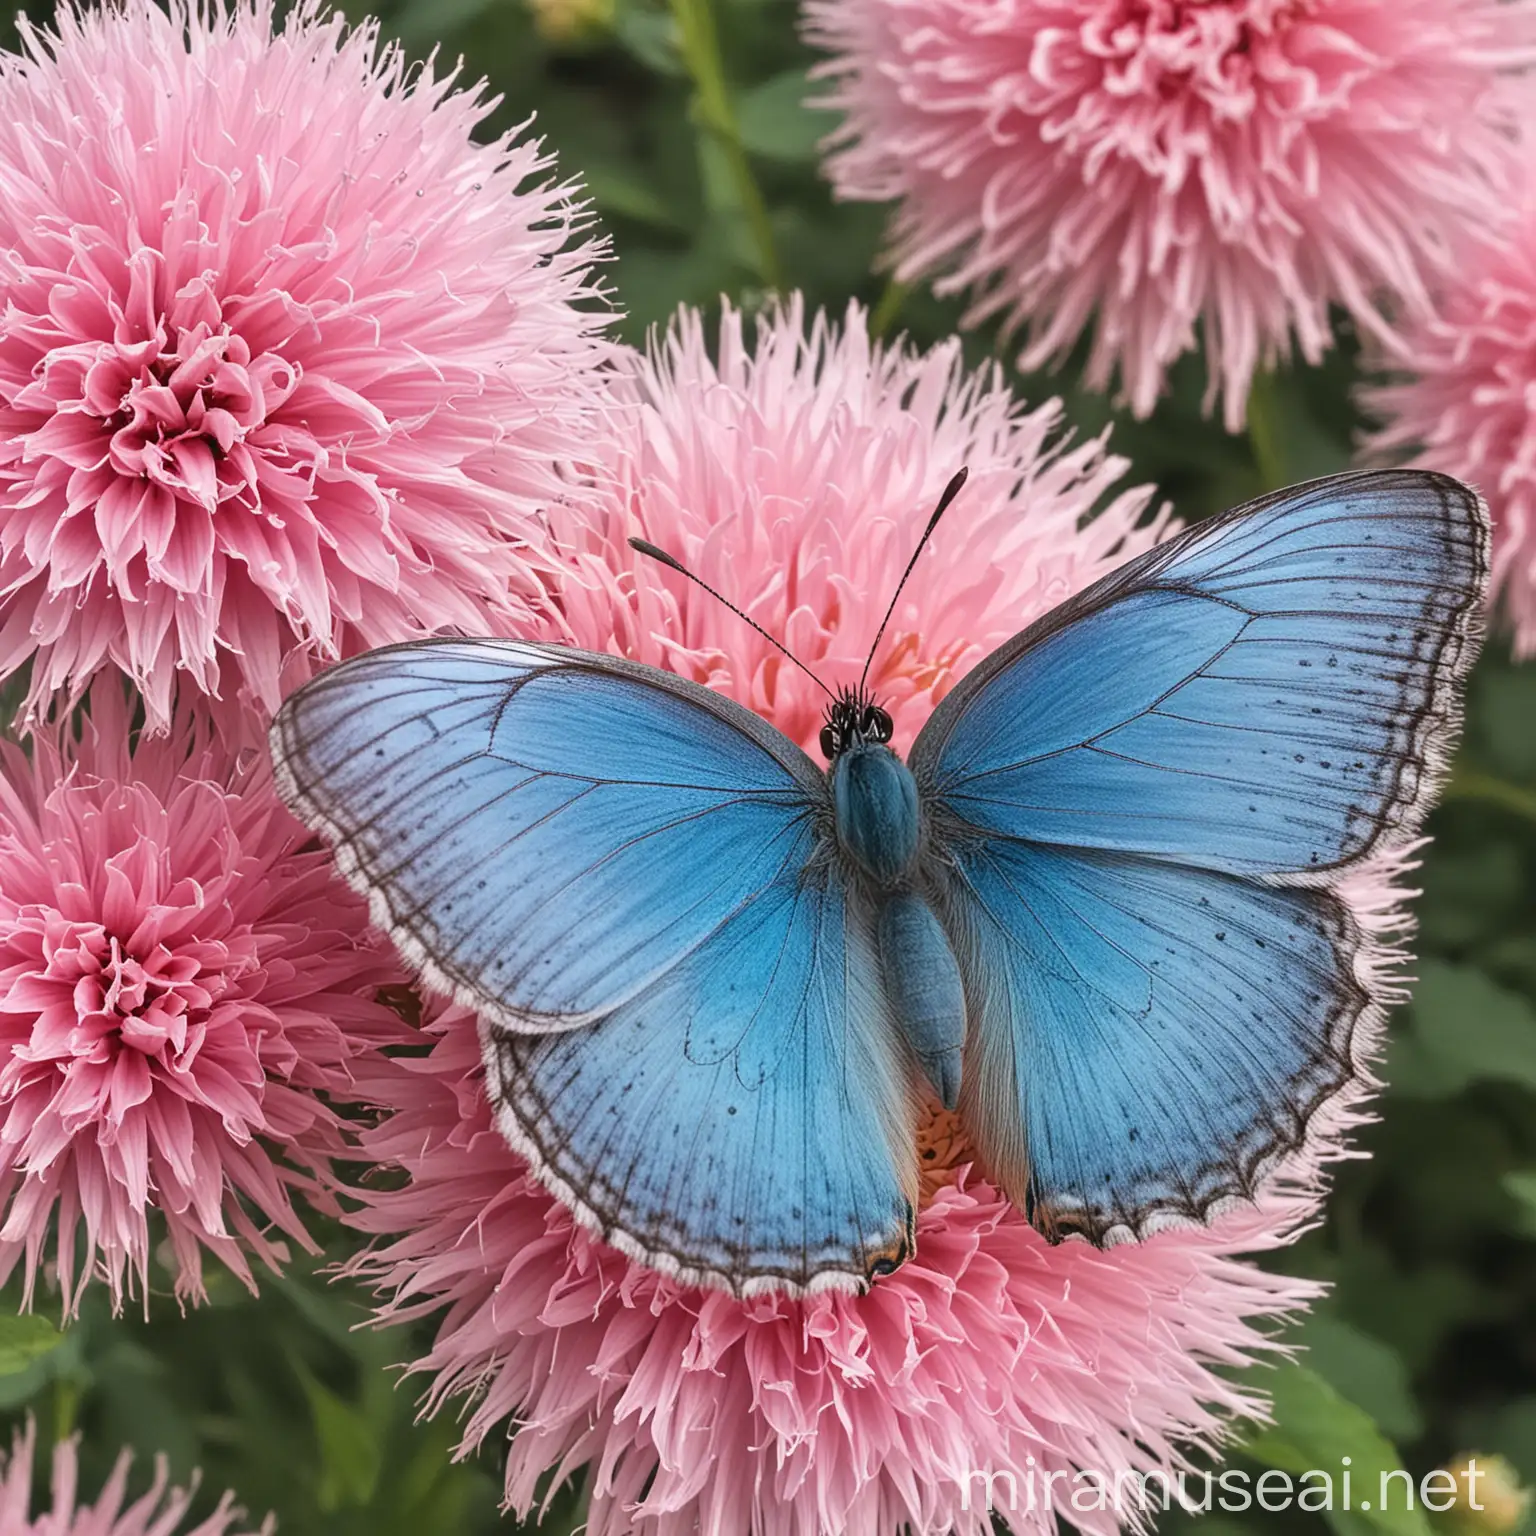 Blue Butterfly Resting on Pink Fluffy Flower